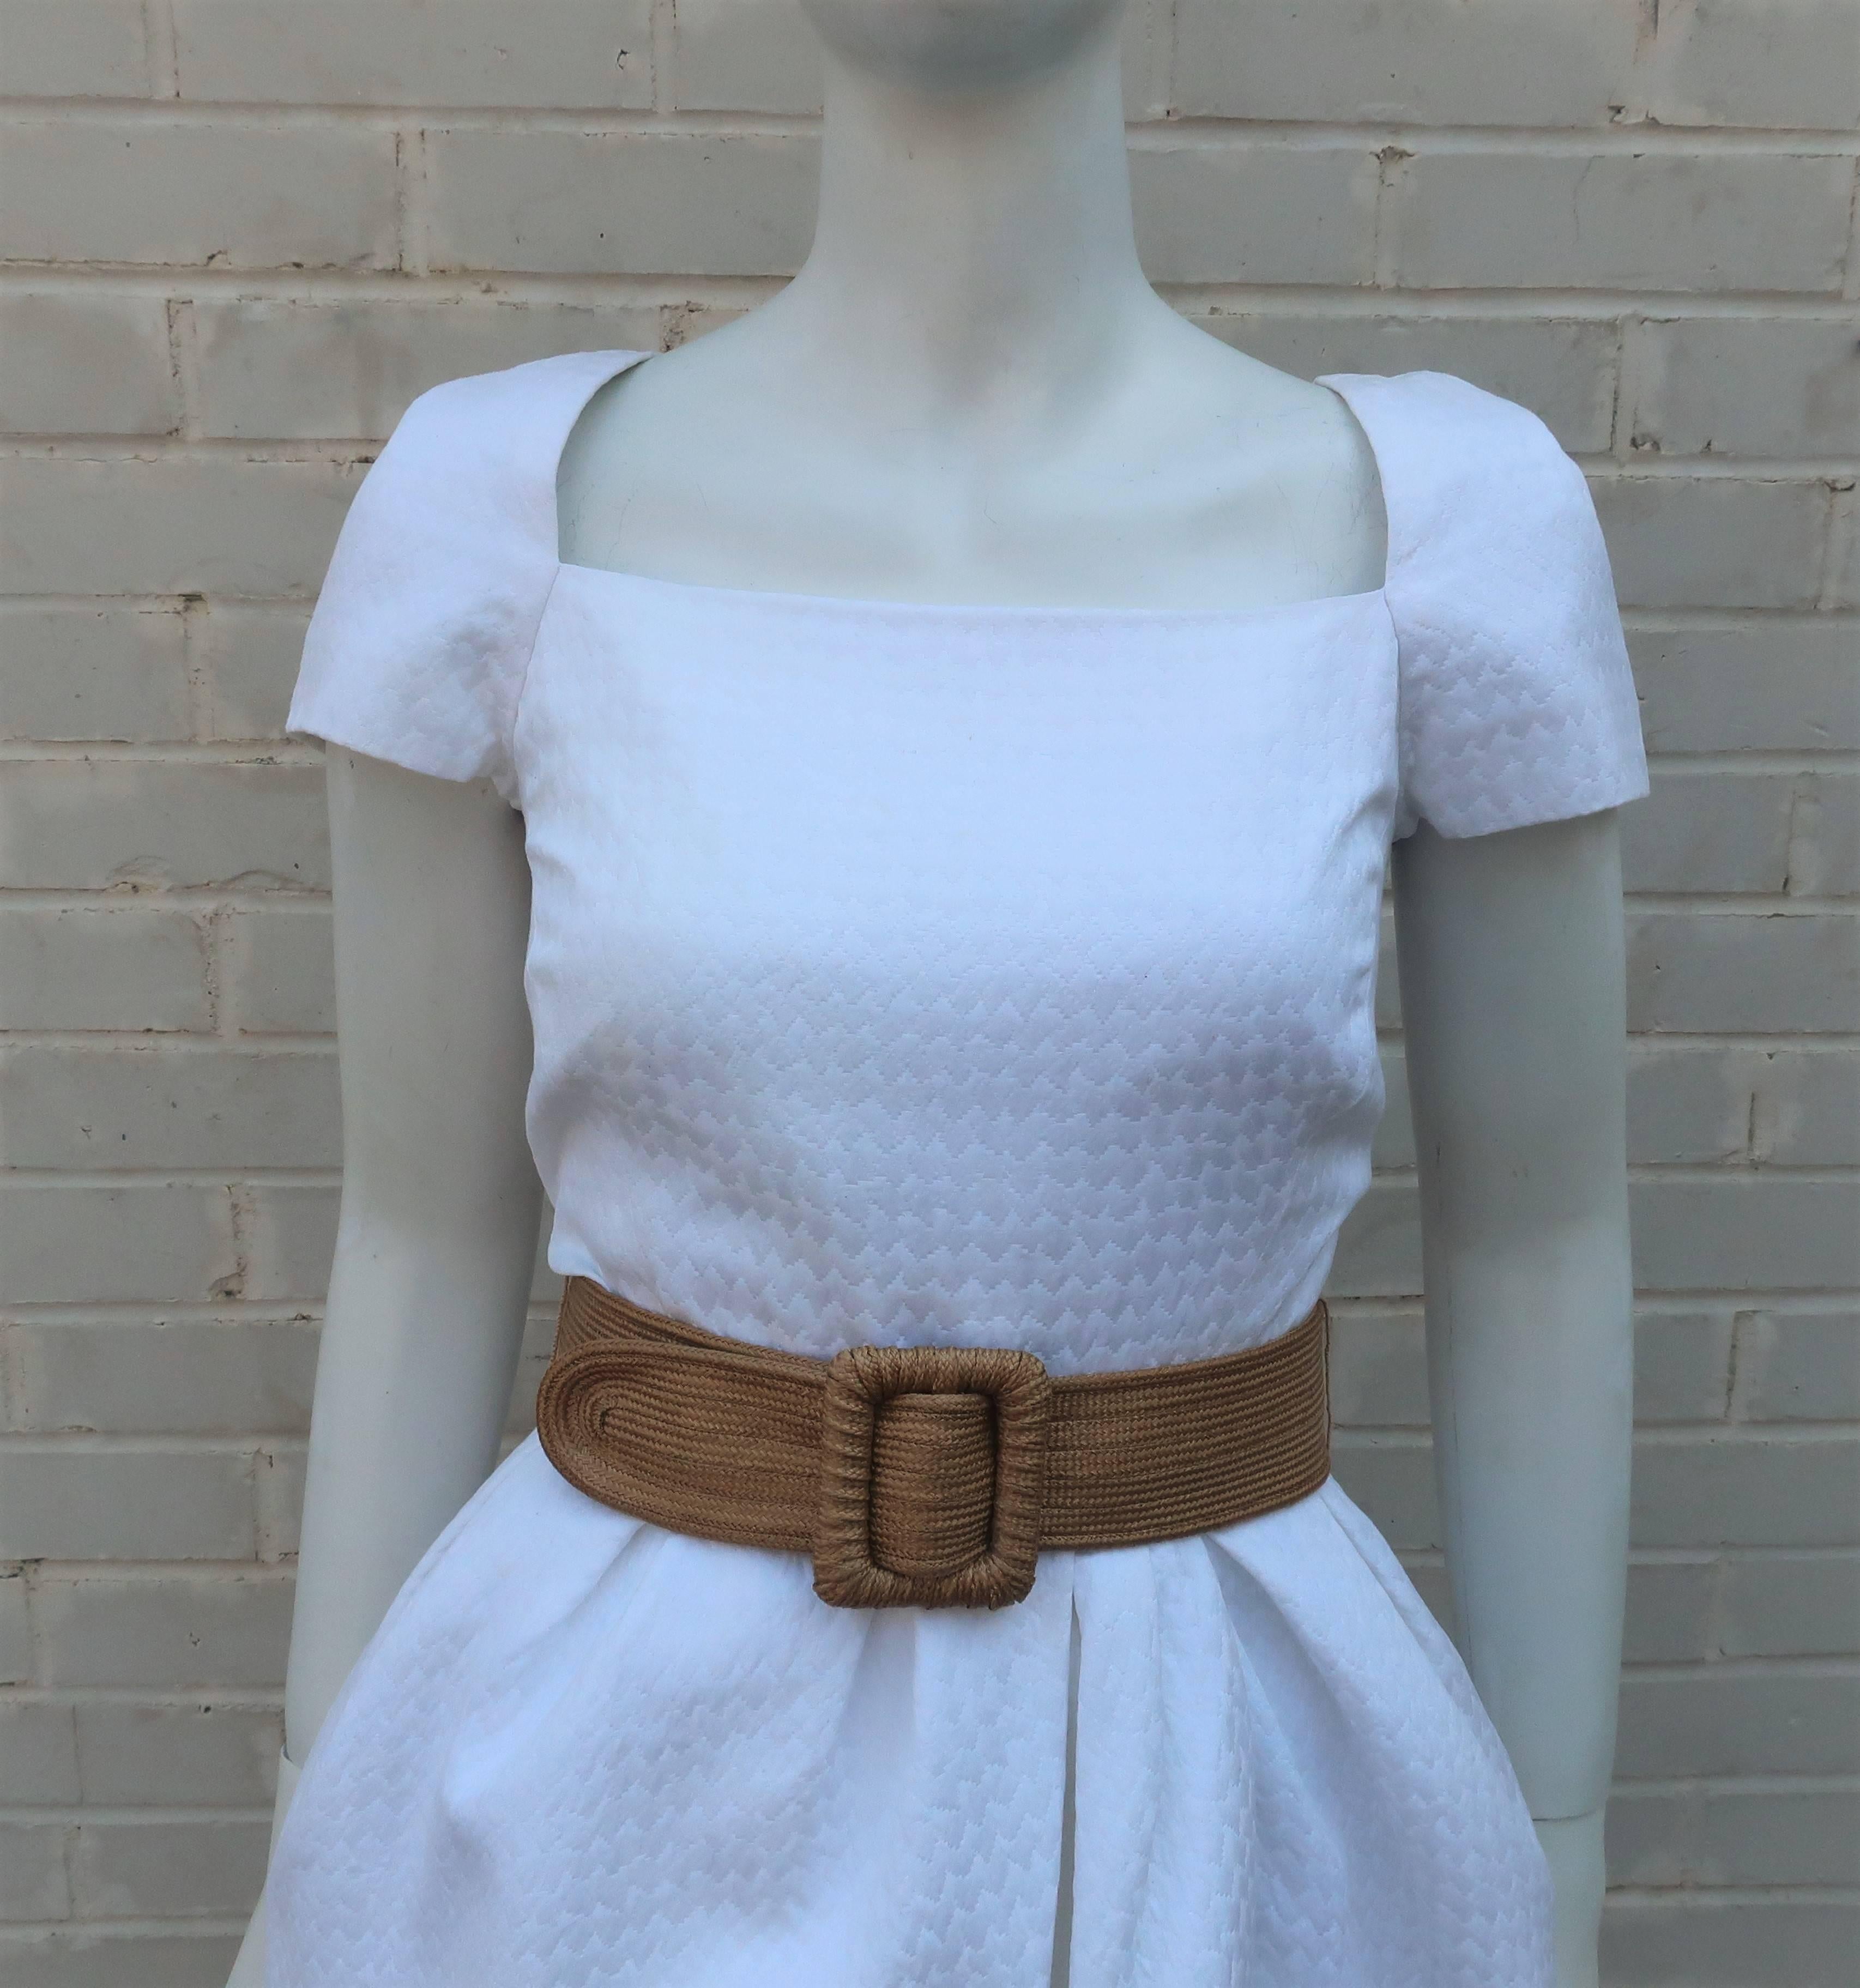 Bill Blass always had a talent for creating luxurious designs for sophisticated women with an eye for style.  This 1980's dress has a youthful aesthetic with capped sleeves, a cinched waist, pockets and a fun tulip style skirt that bubbles with